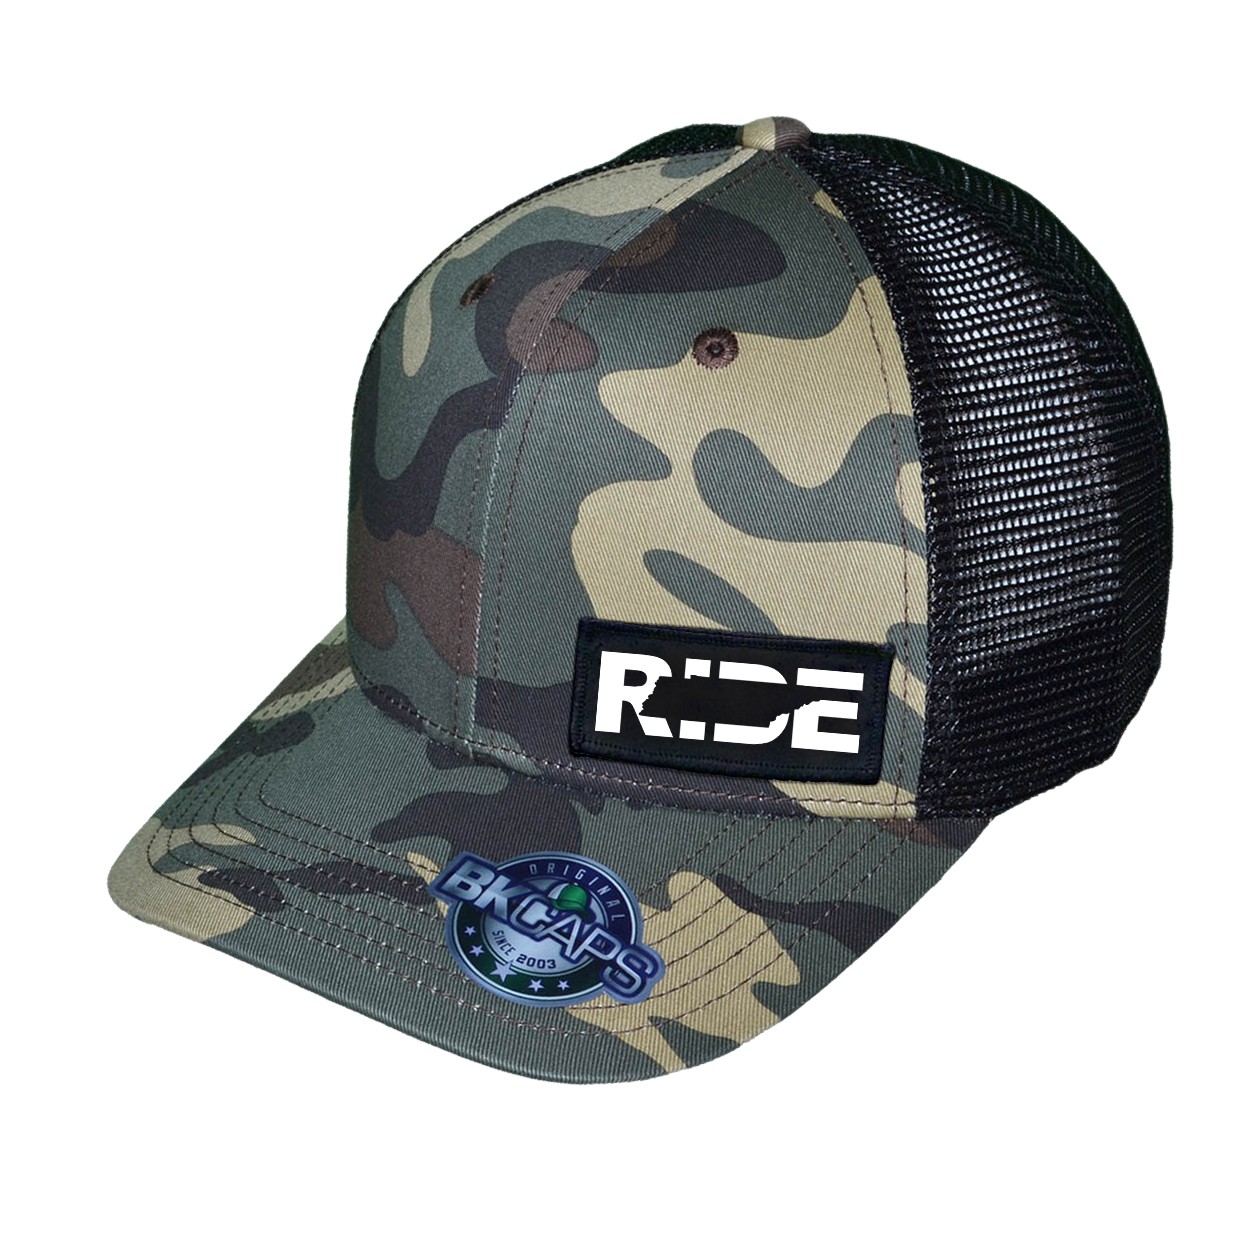 Ride Tennessee Night Out Woven Patch Mesh Snapback Trucker Hat Khaki/Camo (White Logo)